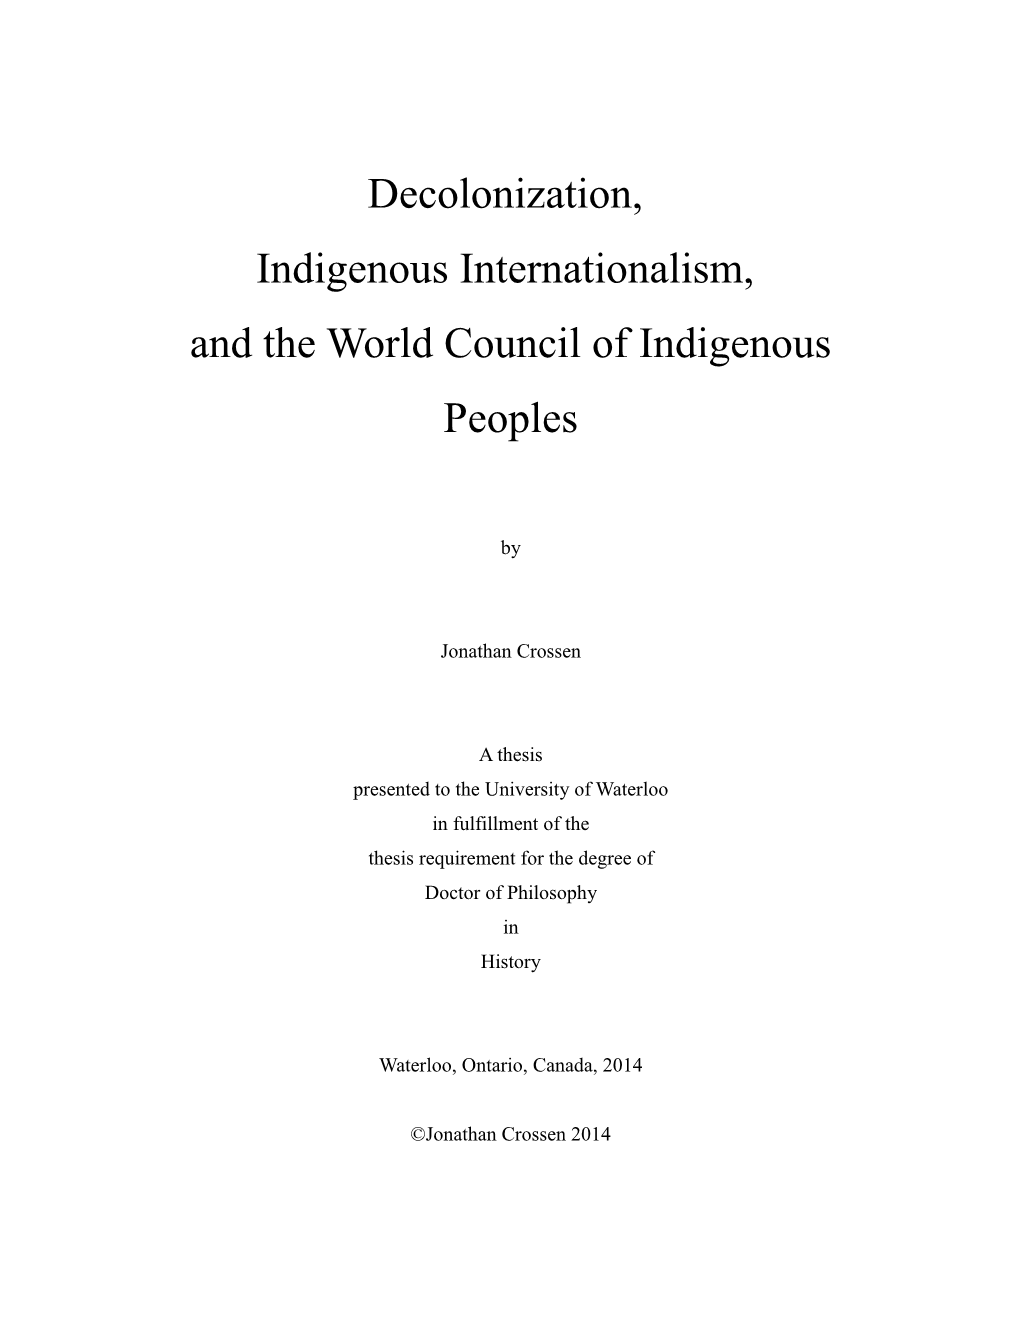 Decolonization, Indigenous Internationalism, and the World Council of Indigenous Peoples